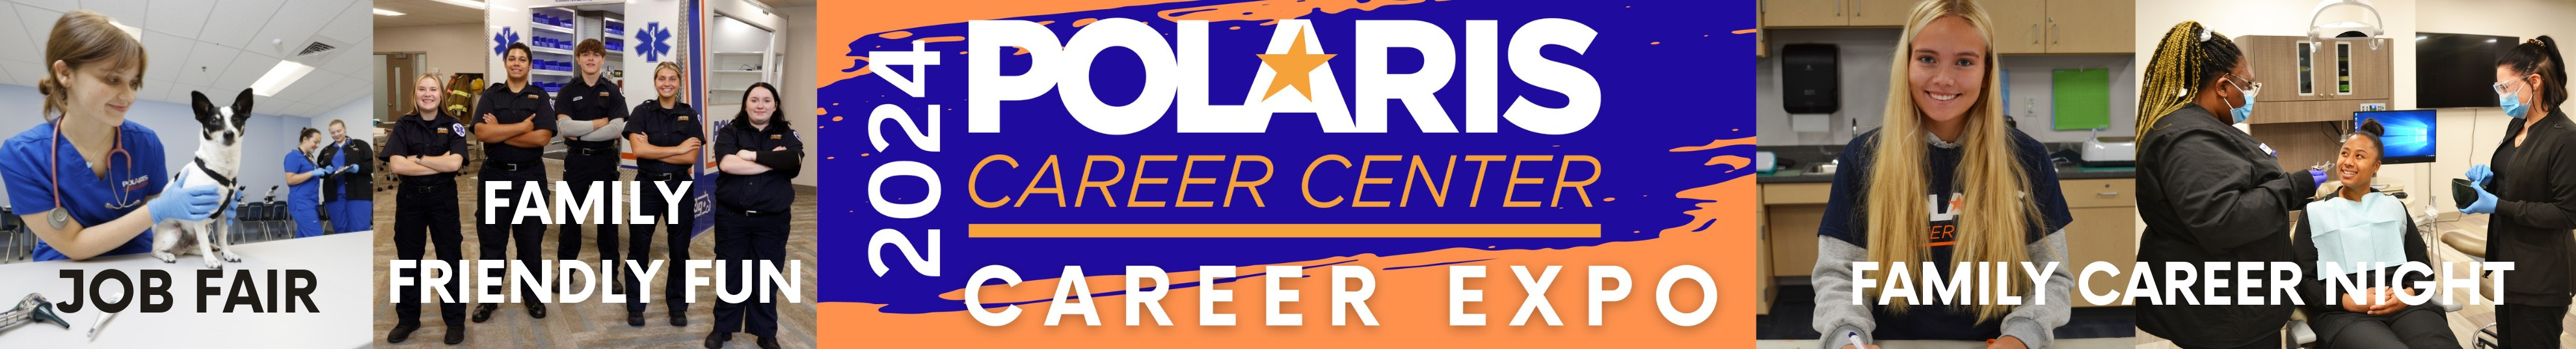 career expo banner